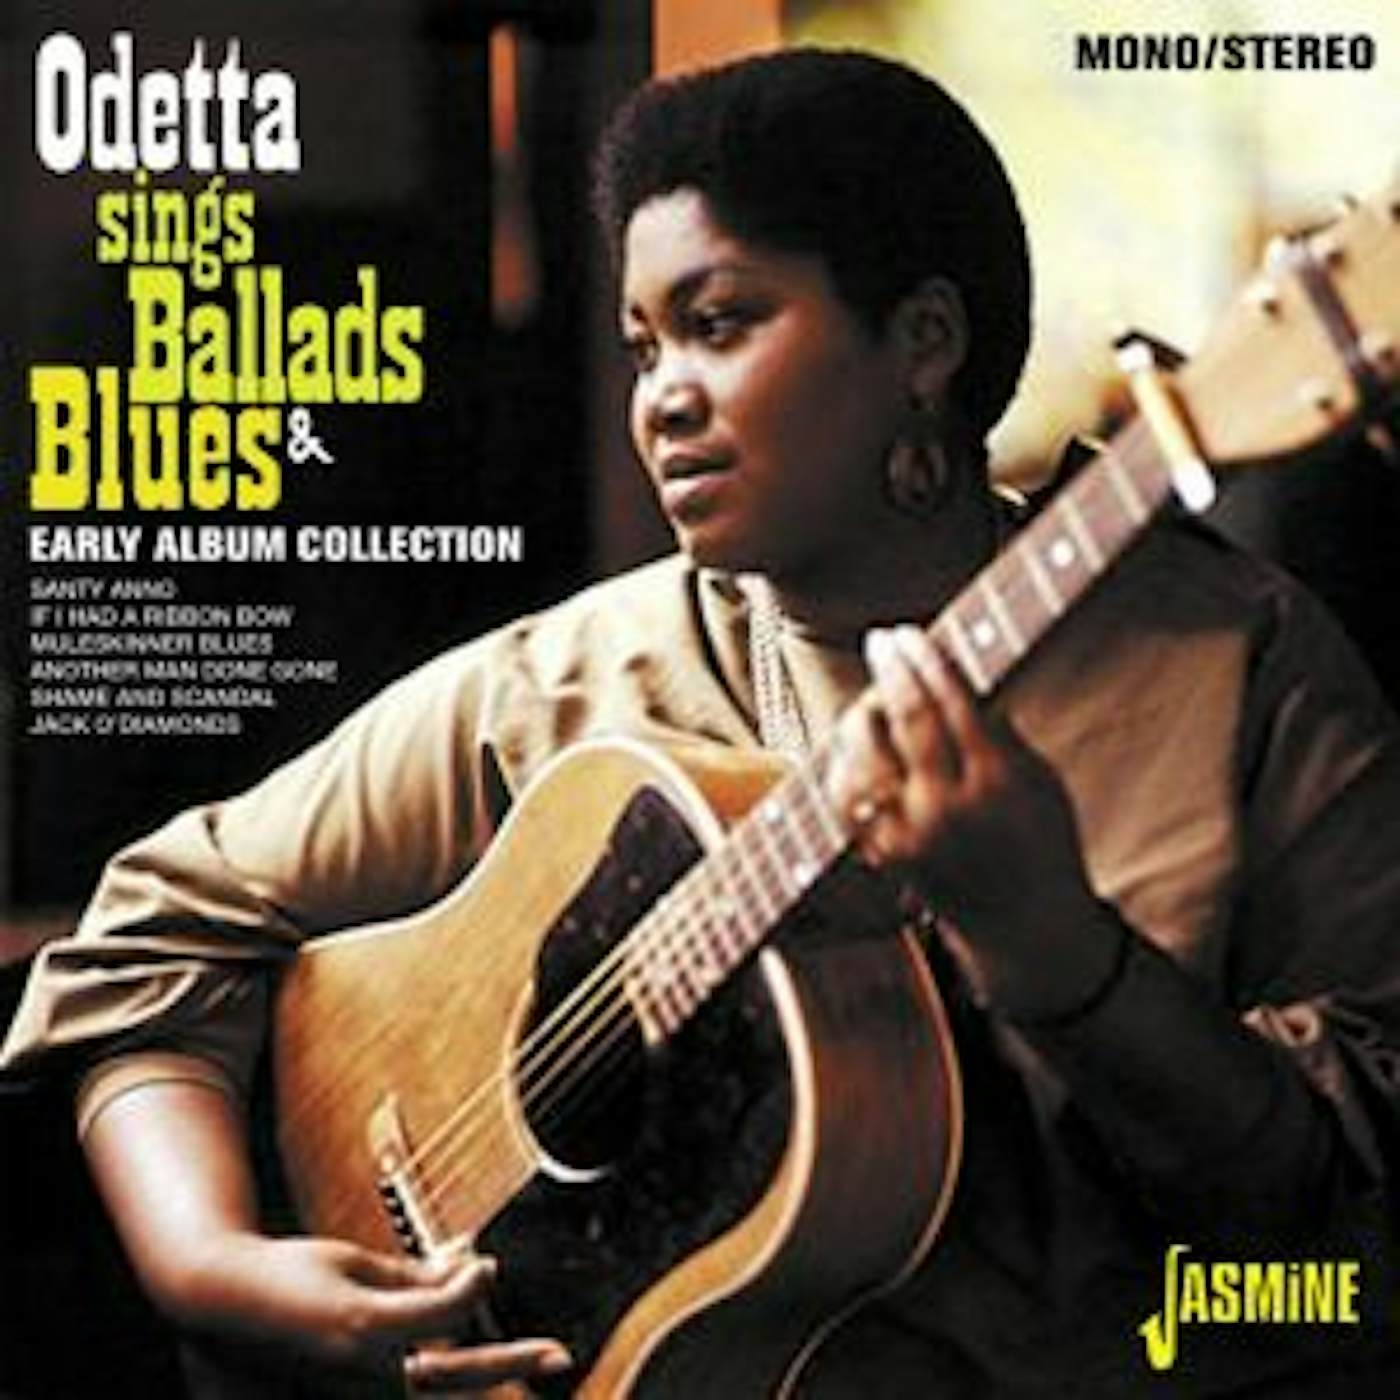 Odetta SINGS BALLADS & BLUES: EARLY ALBUM COLLECTION CD